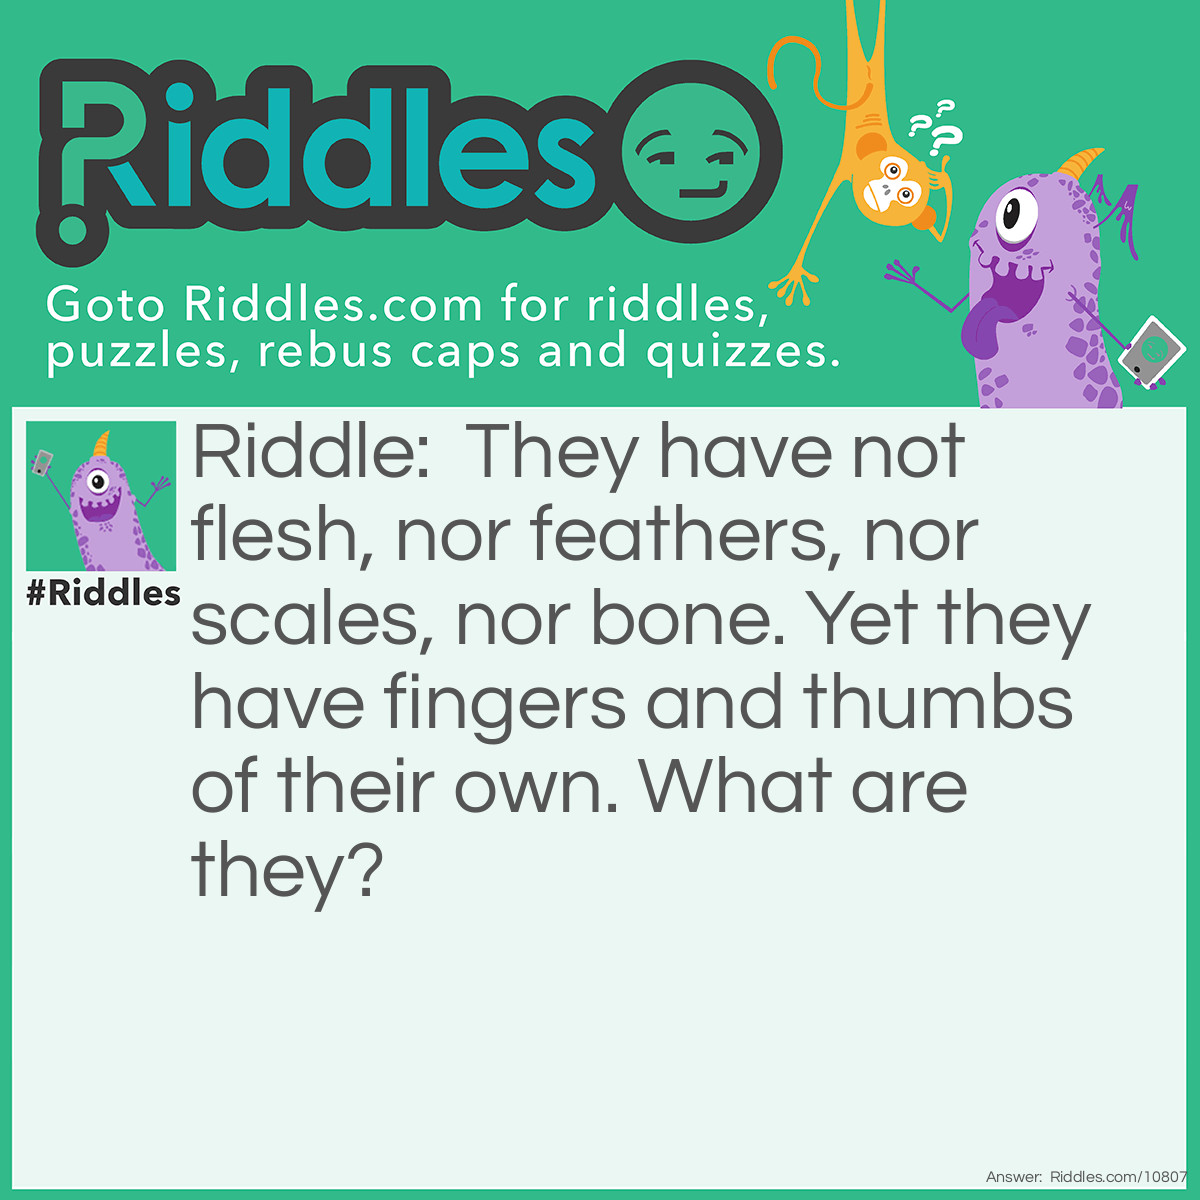 Riddle: They have not flesh, nor feathers, nor scales, nor bone. Yet they have fingers and thumbs of their own. What are they? Answer: Gloves.